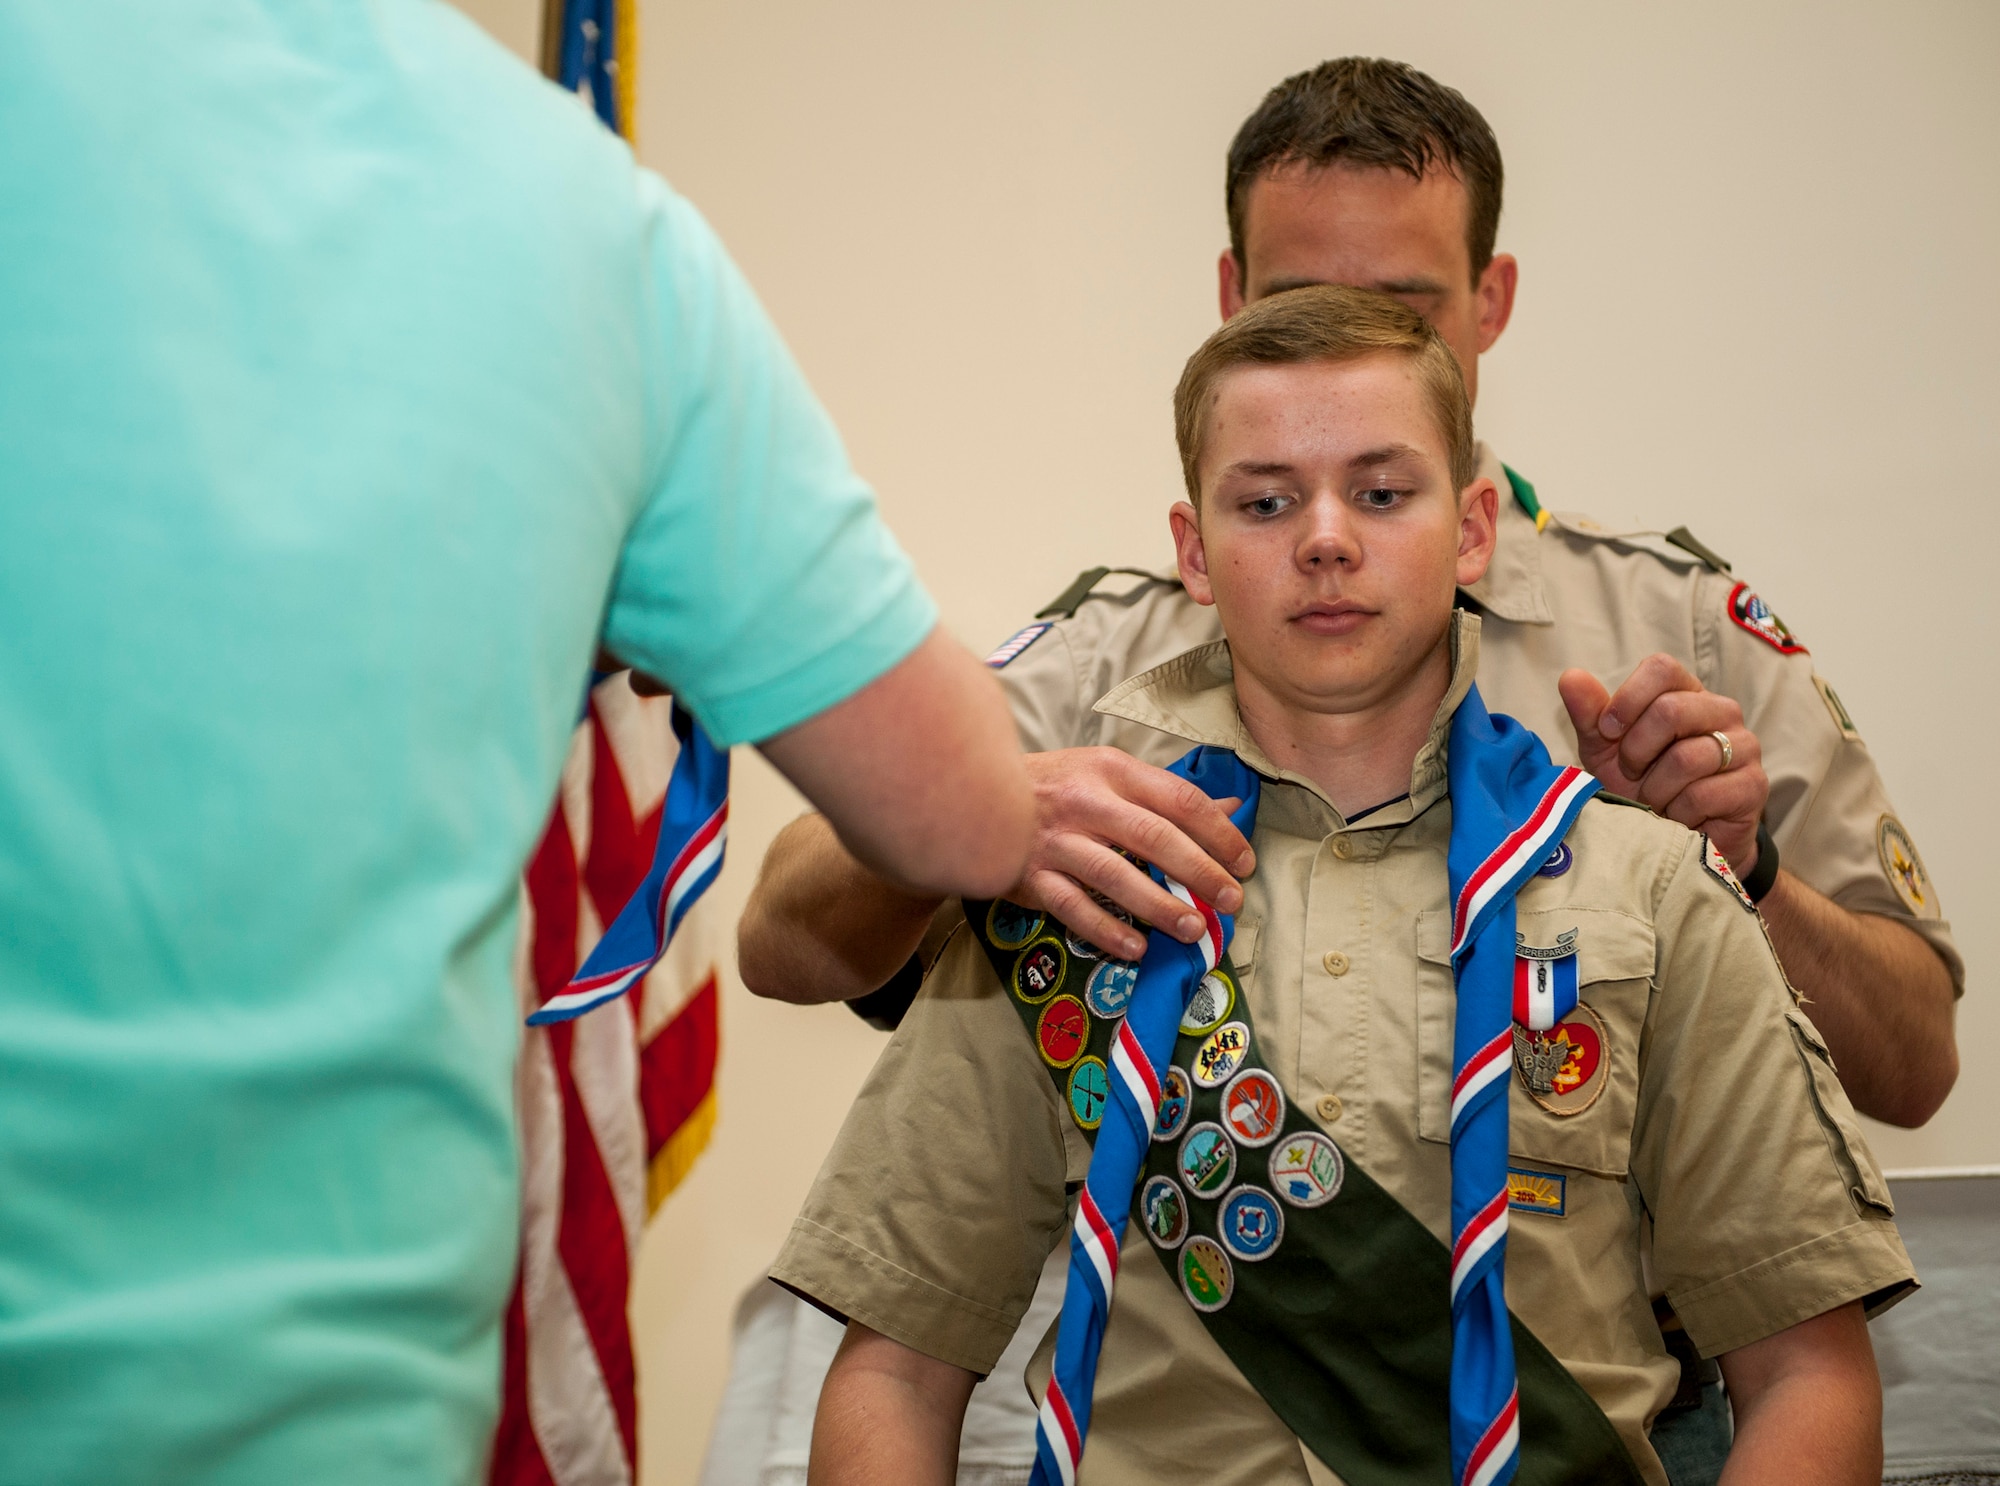 Matthew O’Connor, a Boy Scouts of America Troop 165 member, receives his Eagle Scout neckerchief during a recognition ceremony in the base chapel at Spangdahlem Air Base, Germany, May 18, 2016. The BSA is a values-based youth development organization that provides a program for young people that builds character. (U.S. Air Force photo by Airman 1st Class Timothy Kim/Released)